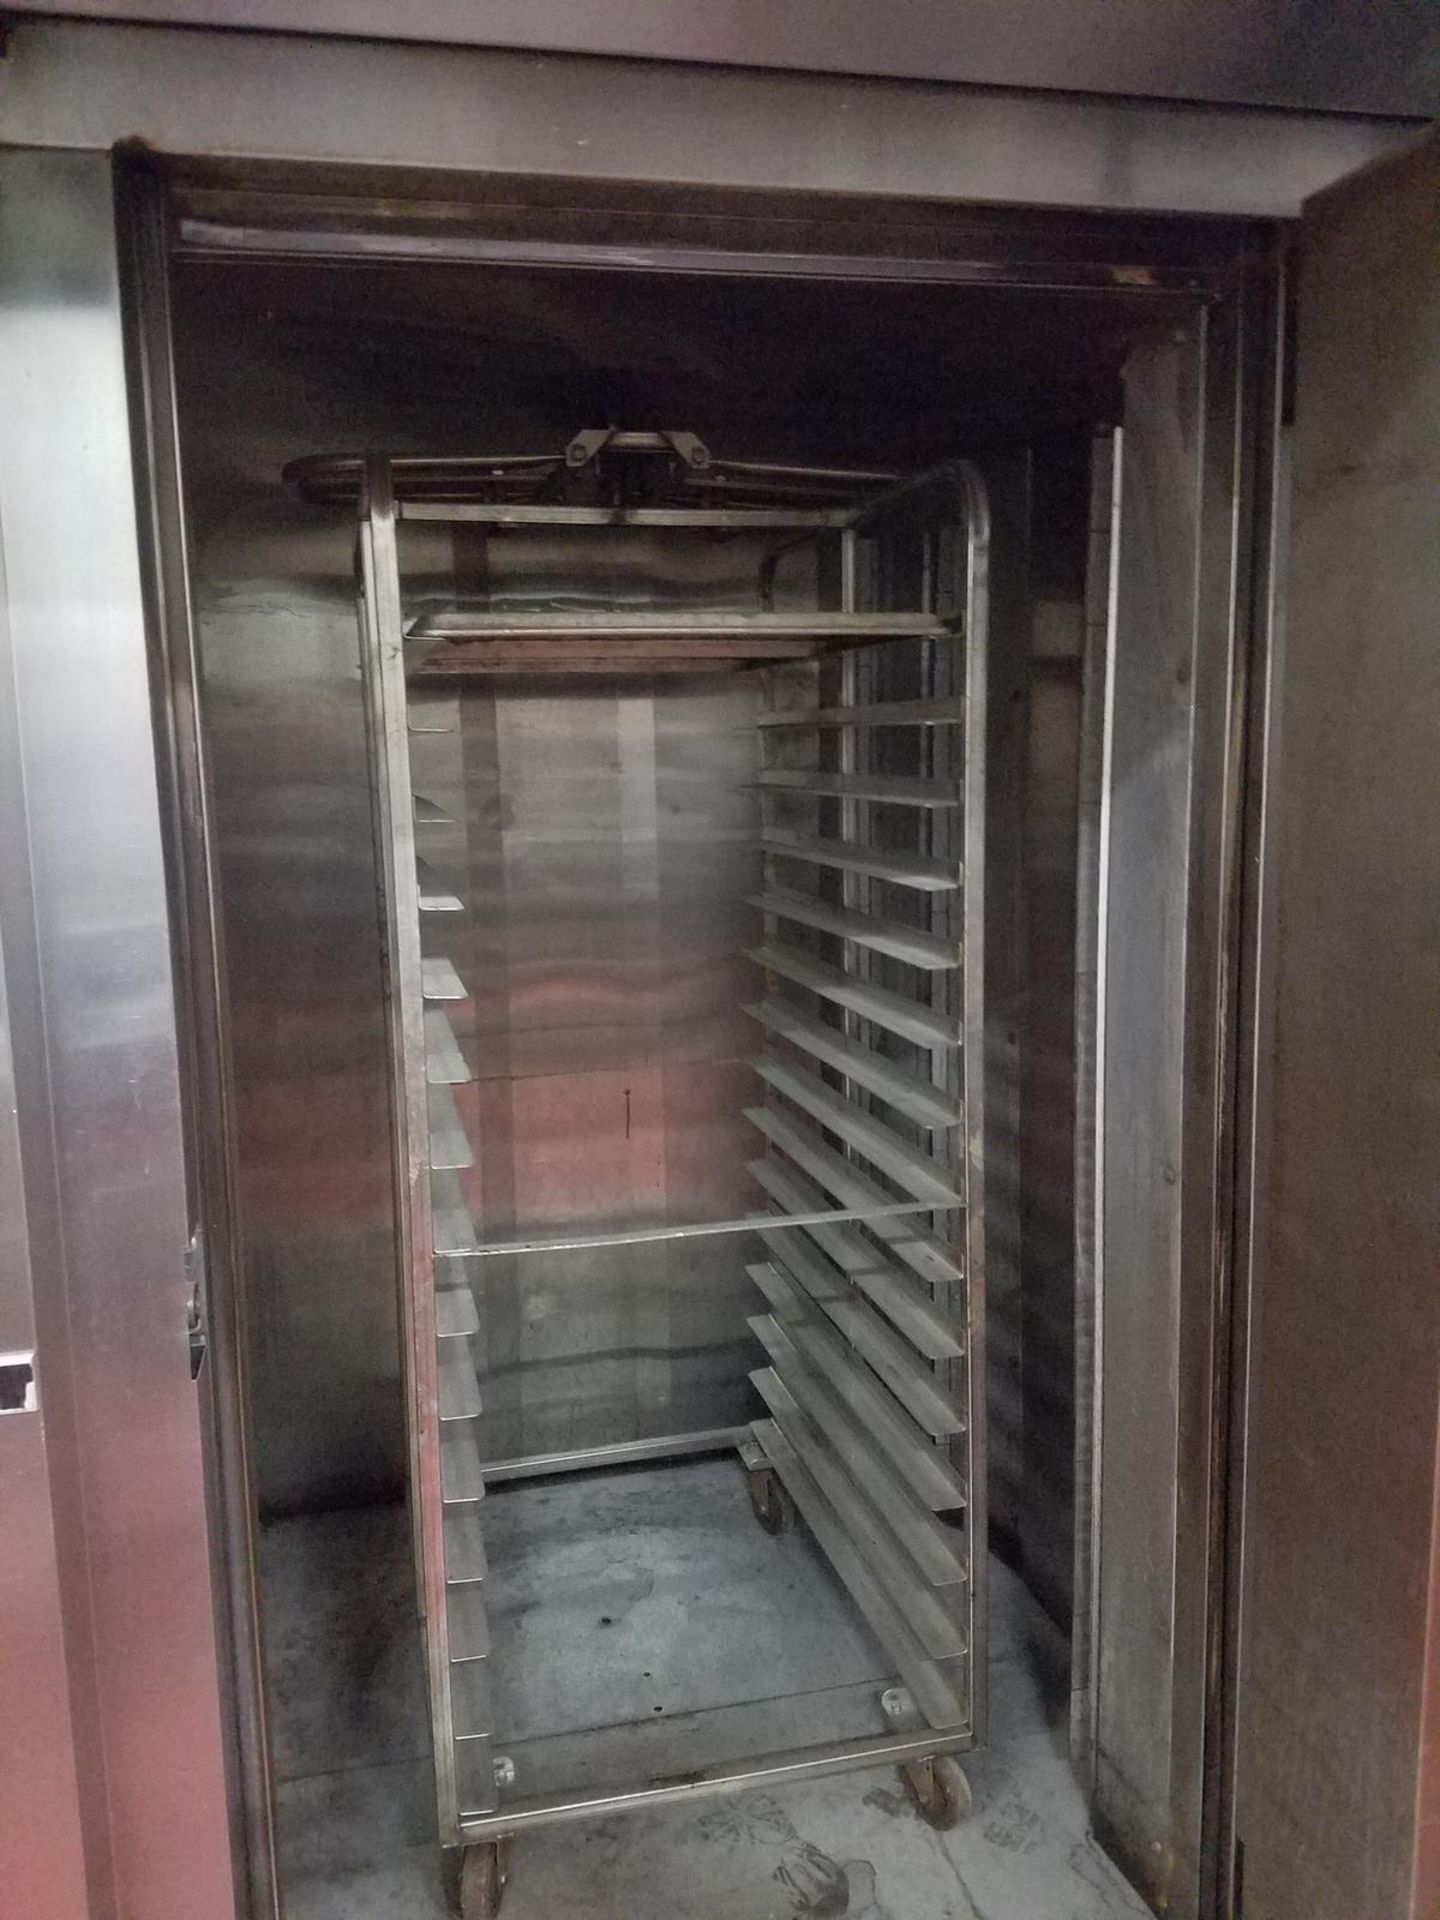 Revent Double Rack Oven, M# 724 G CG U, S/N U08-2431-281-4908, Natural Gas, 343,000 | Rig Fee: $1250 - Image 4 of 4